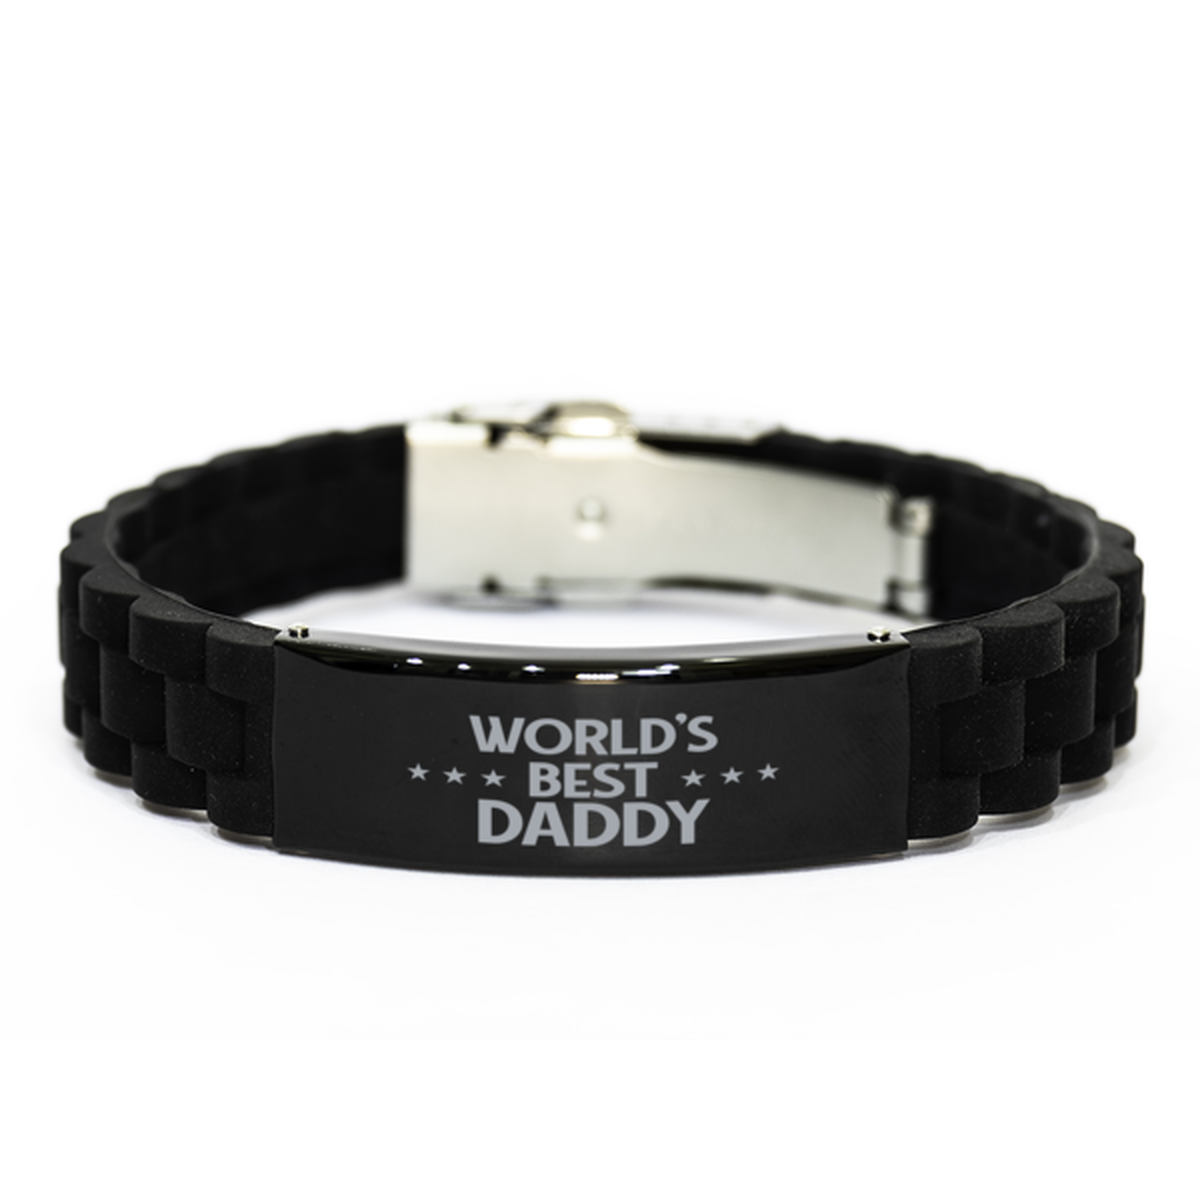 World's Best Daddy Gifts, Funny Black Engraved Bracelet For Daddy, Family Gifts For Men